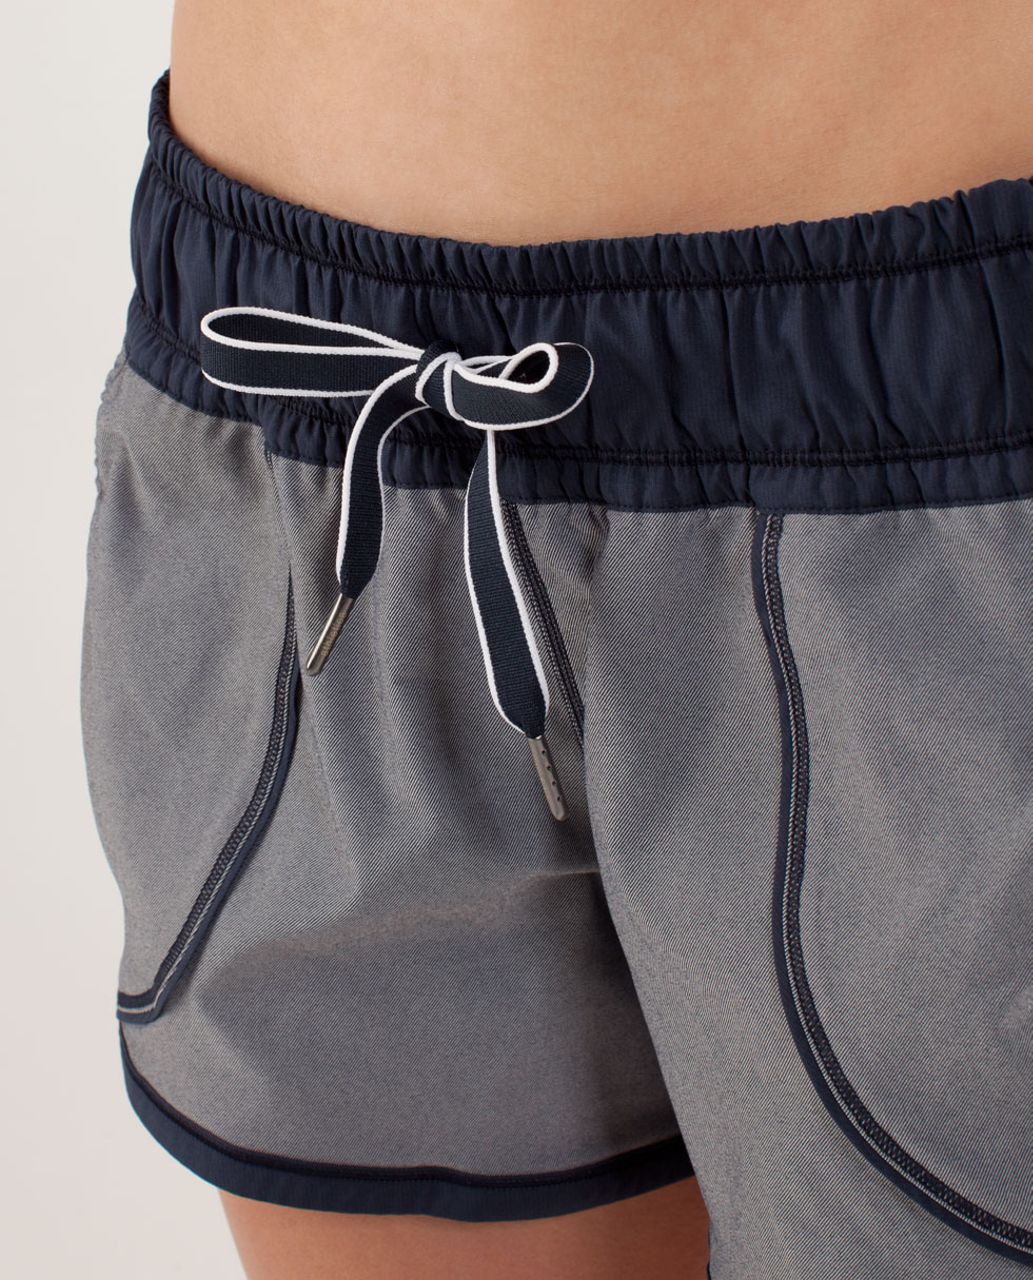 Lululemon Work It Out Short - Inkwell